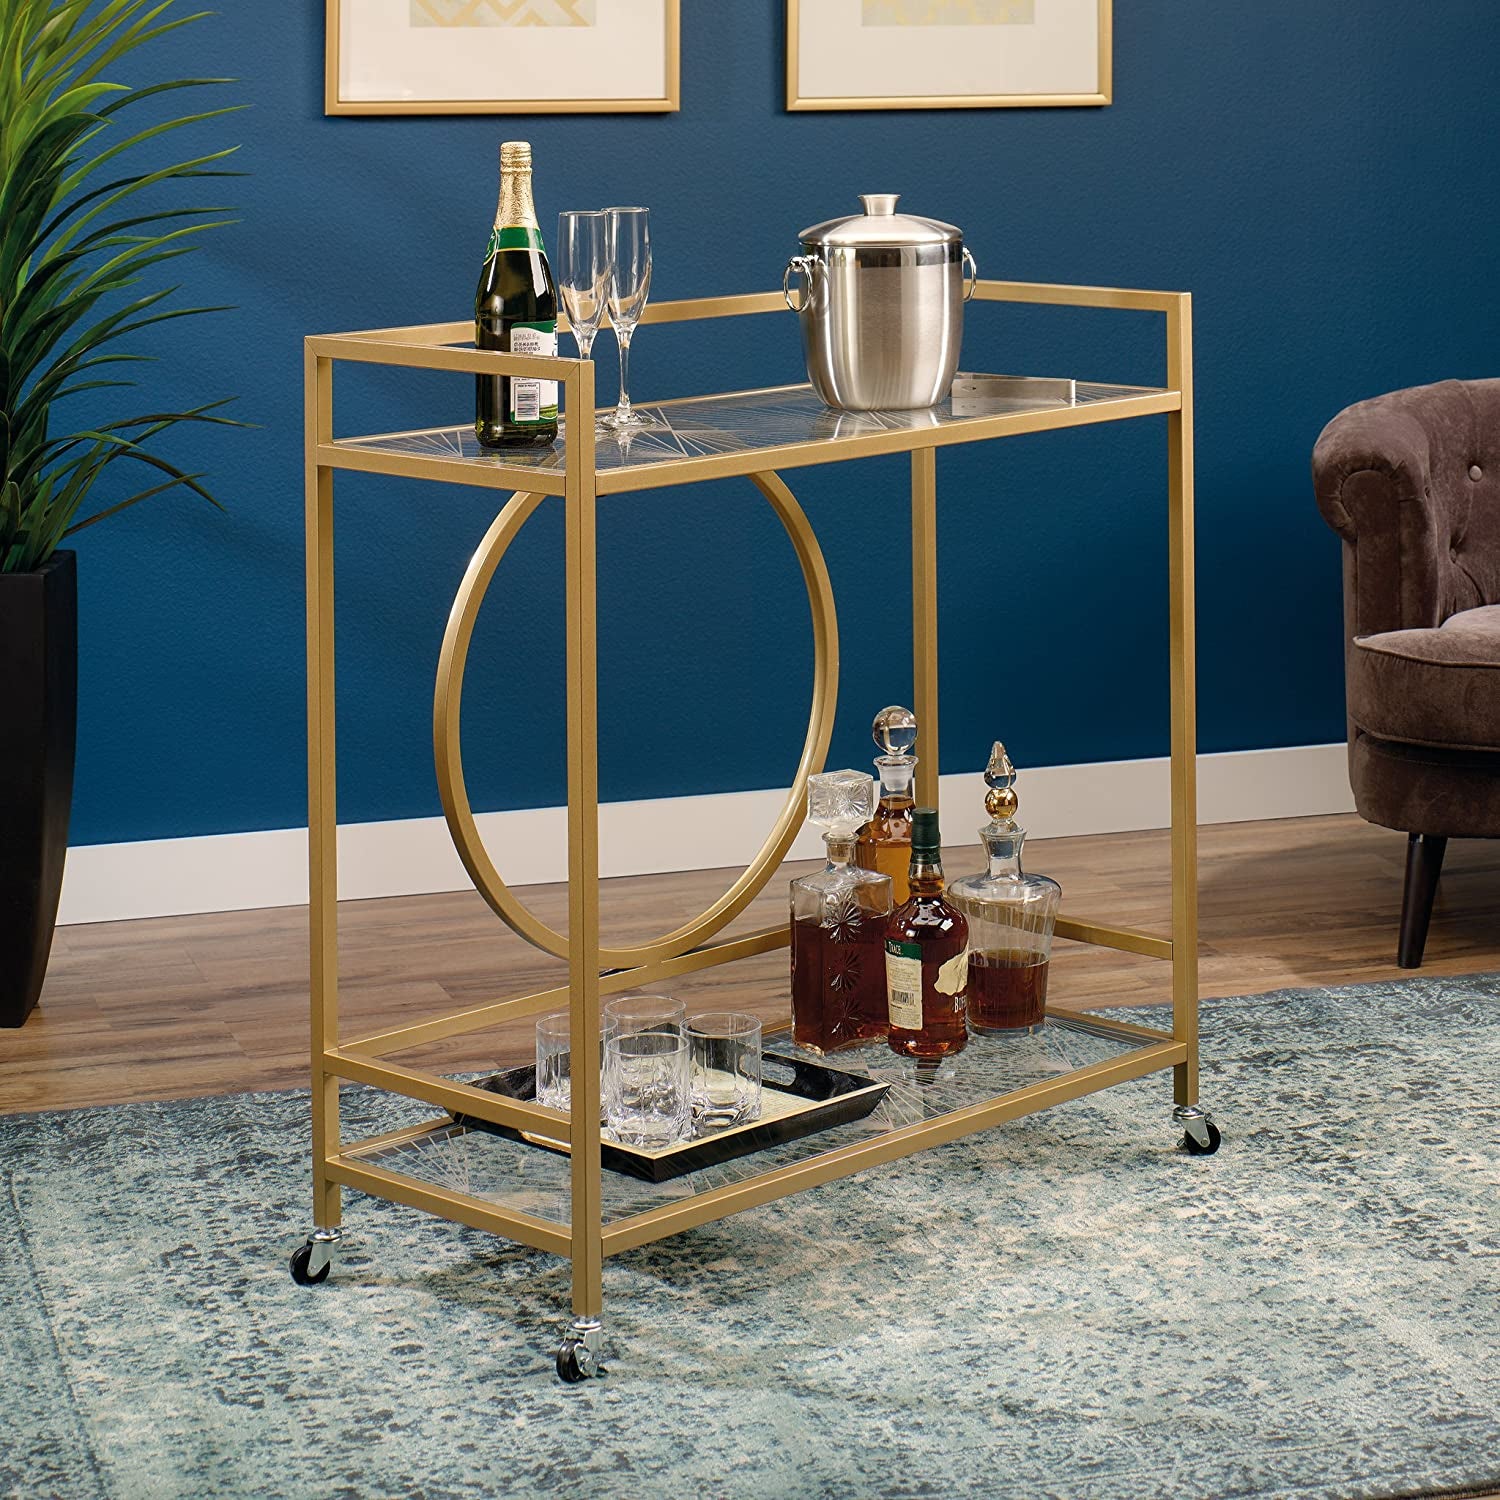 the bar cart with two glass-top shelves with a geometric pattern to them  